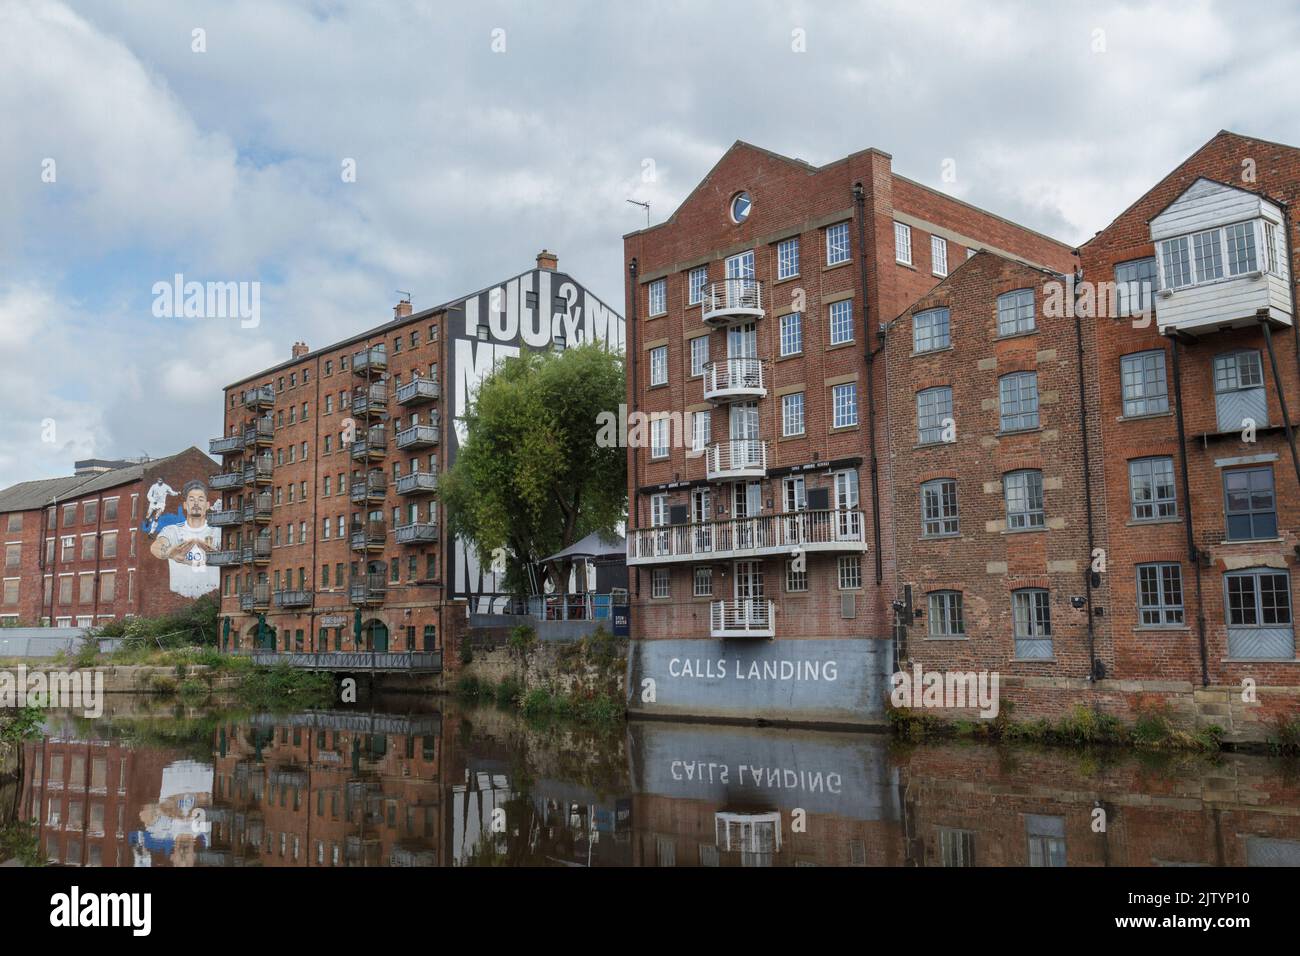 Calls Landing on the River Aire n theThe Calls area of Leeds, West Yorkshire, UK. Stock Photo